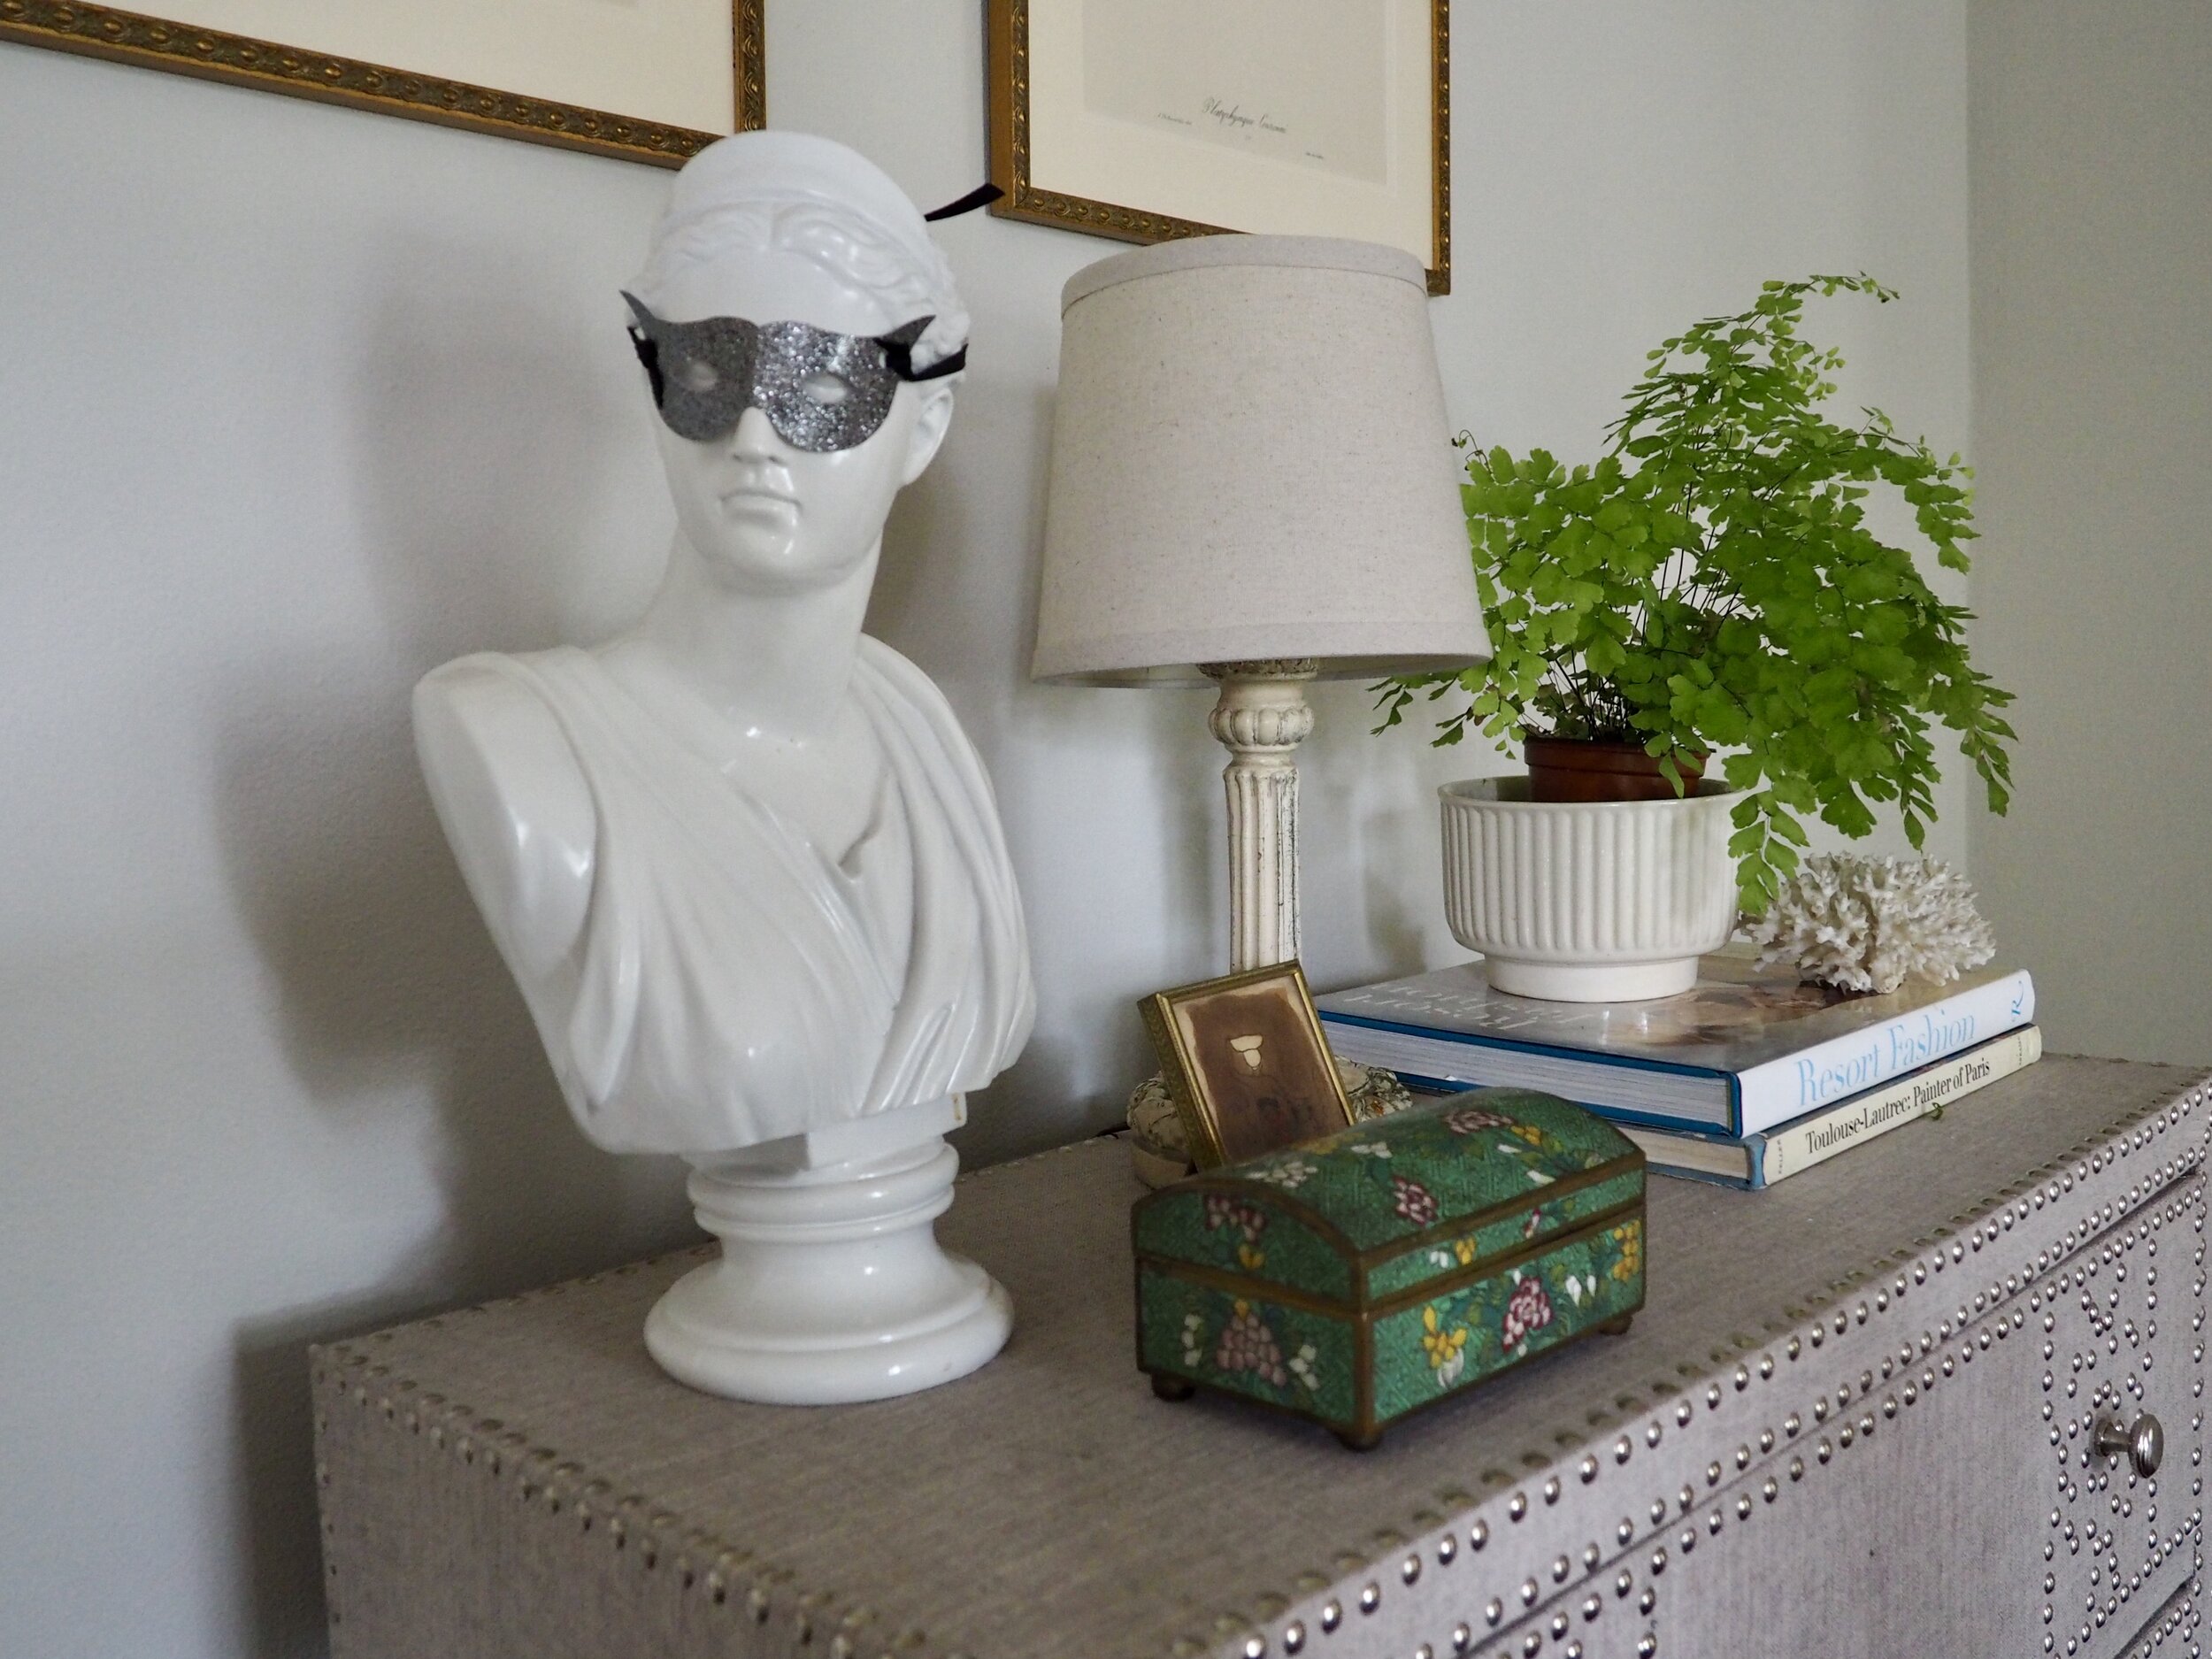 A masked lady presides over the living room